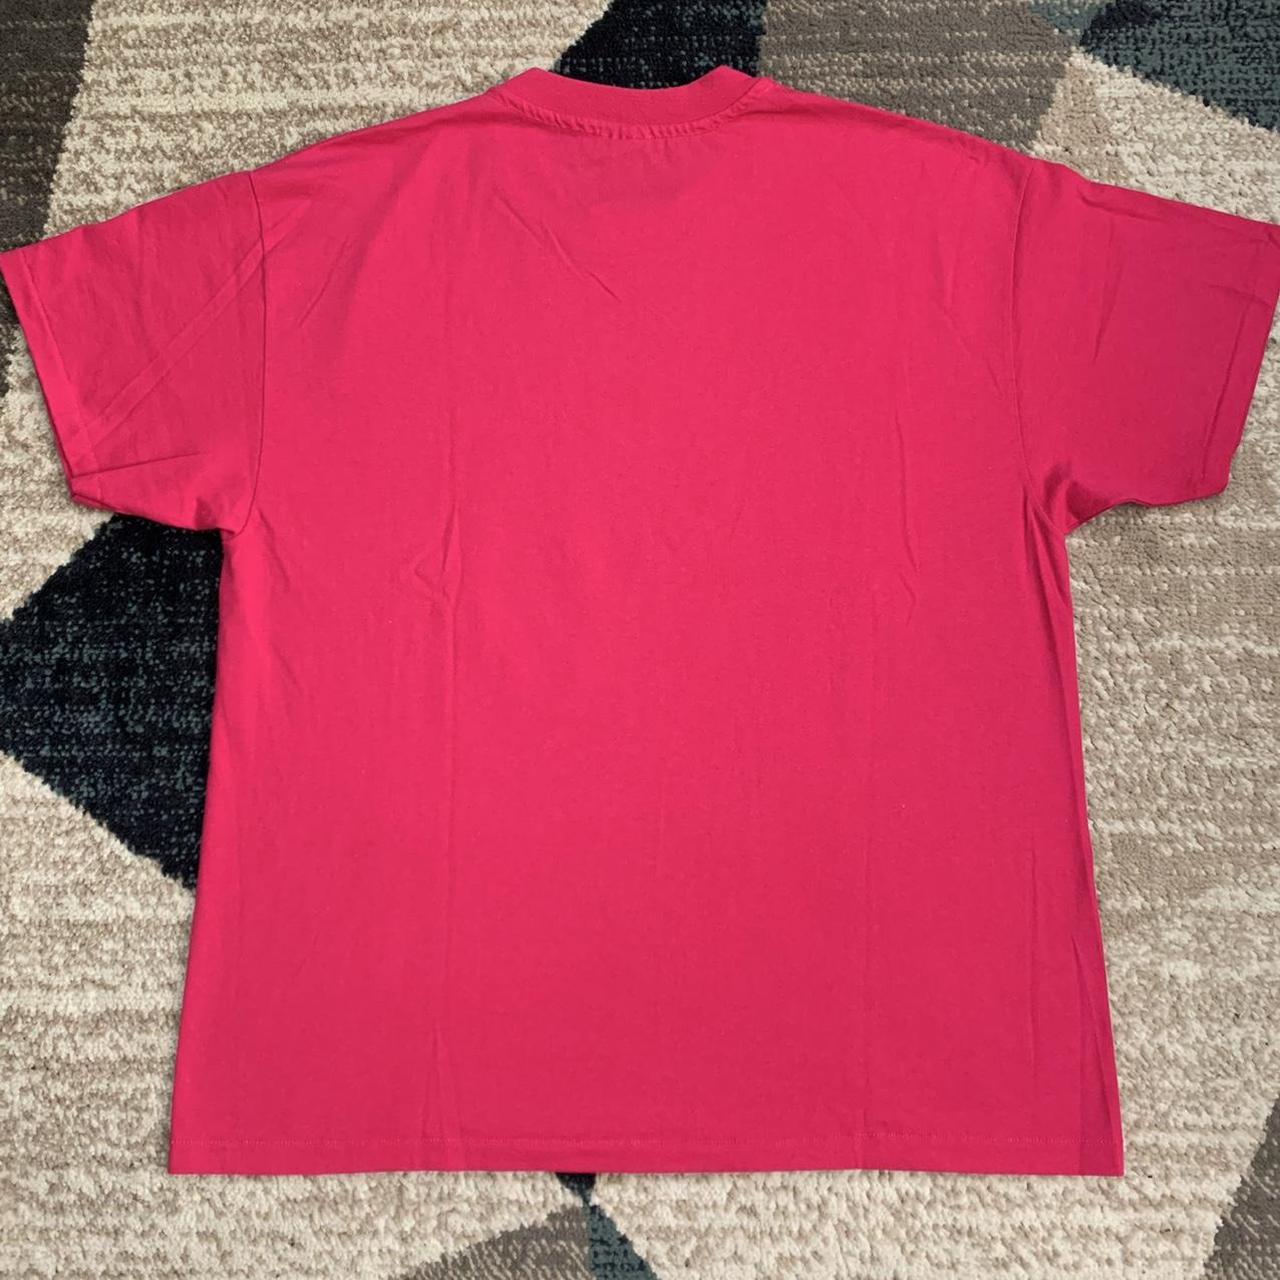 Hanes Men's Pink and Silver T-shirt (3)